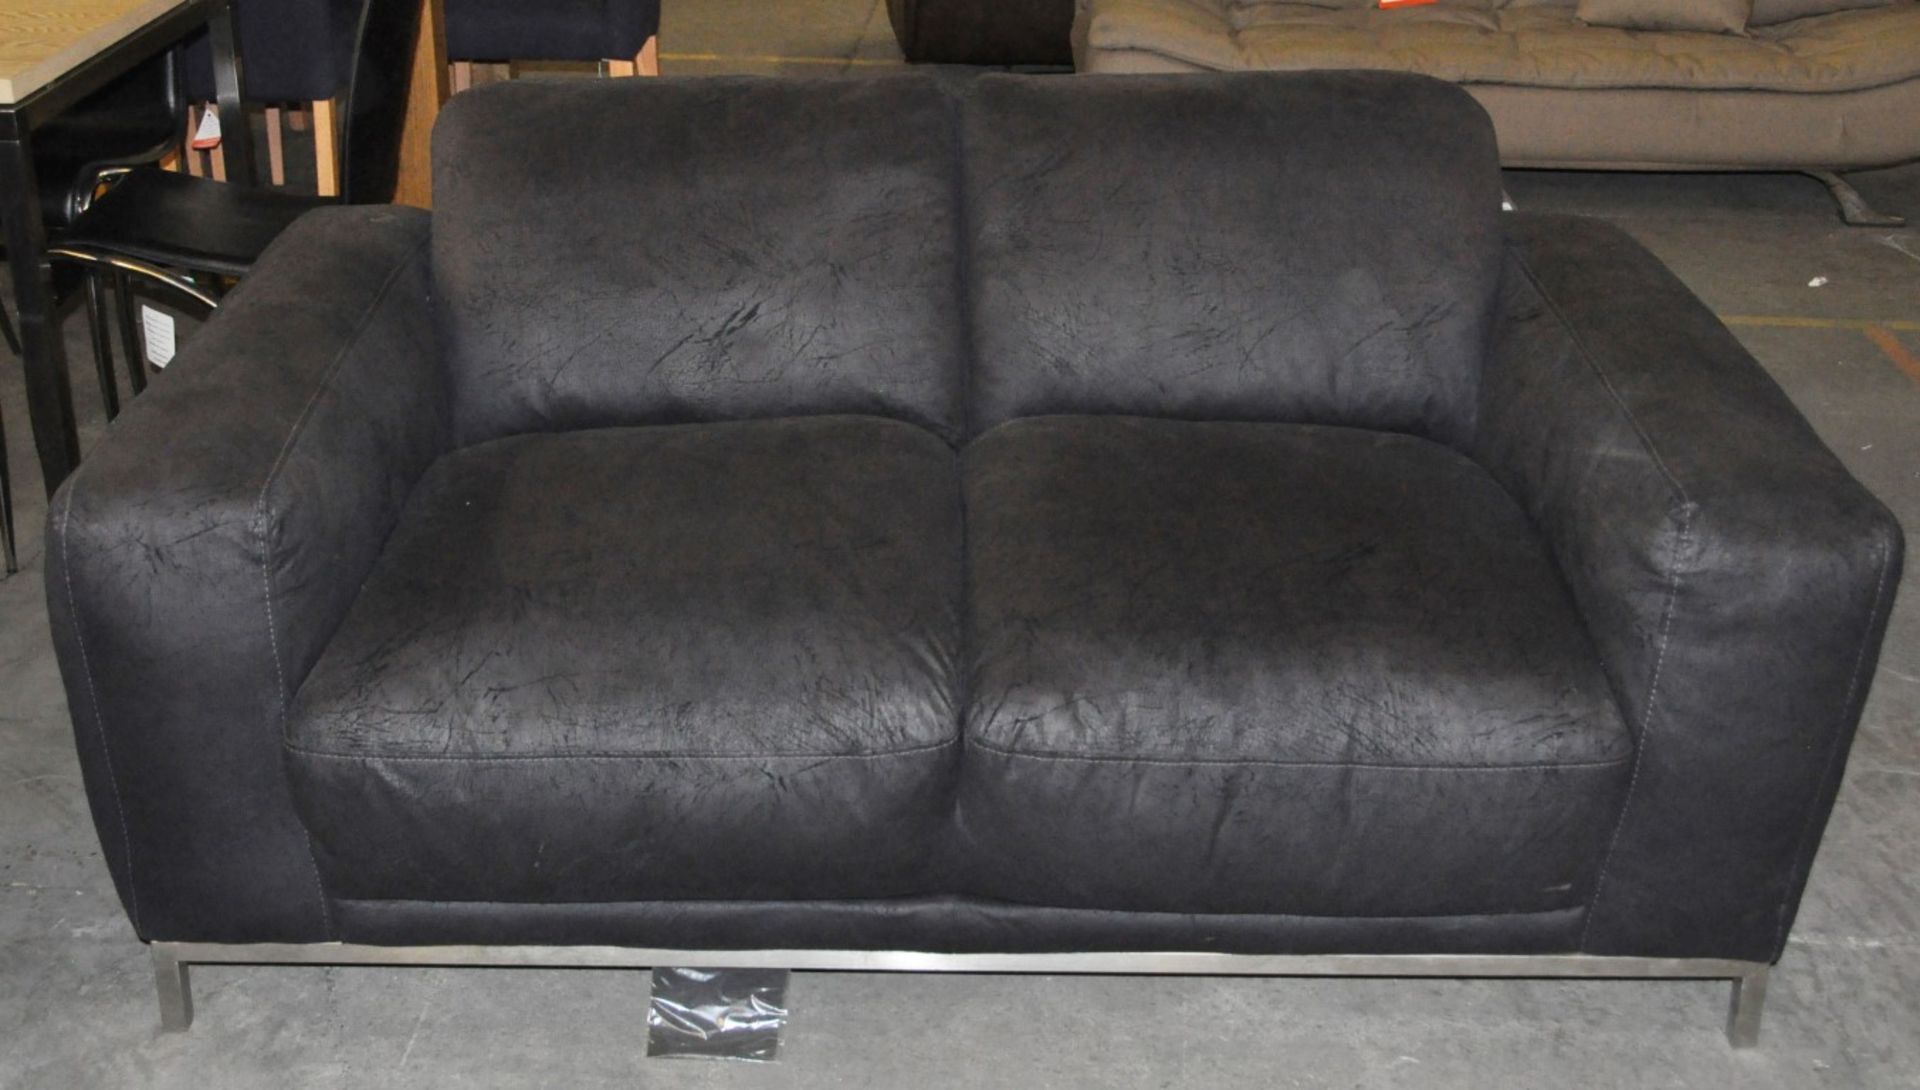 1 x 'Valletta' 3 & 2 Seater Sofa in a Black Crackle Fabric – Ex Display - Dimensions (2 Seater) - Image 2 of 6